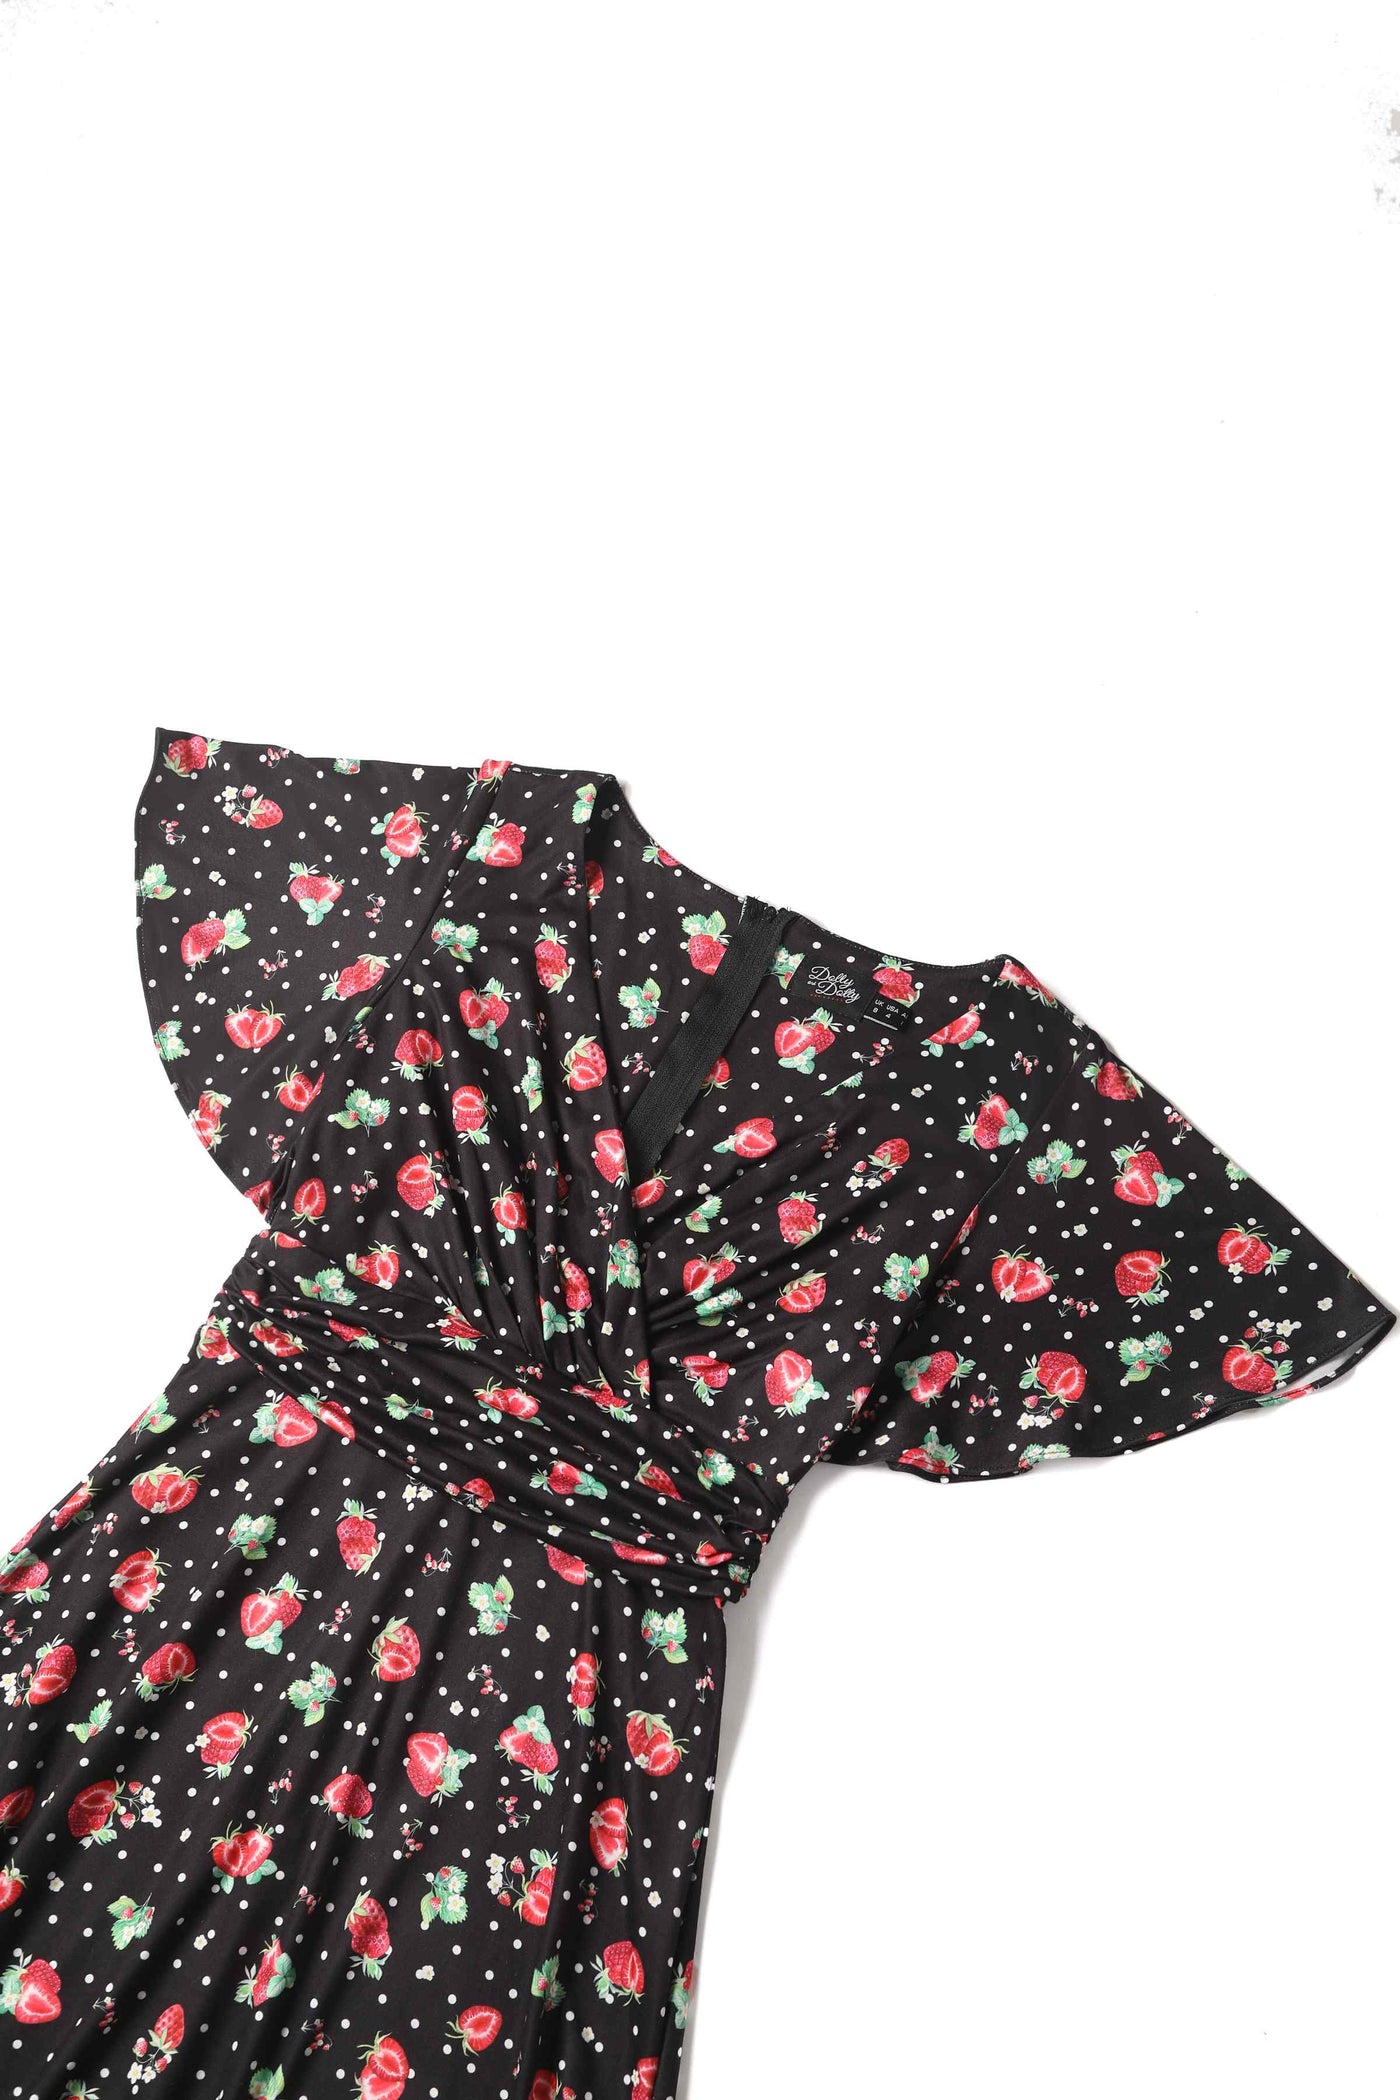 Top view of Black Casual Dress with a Strawberry Print